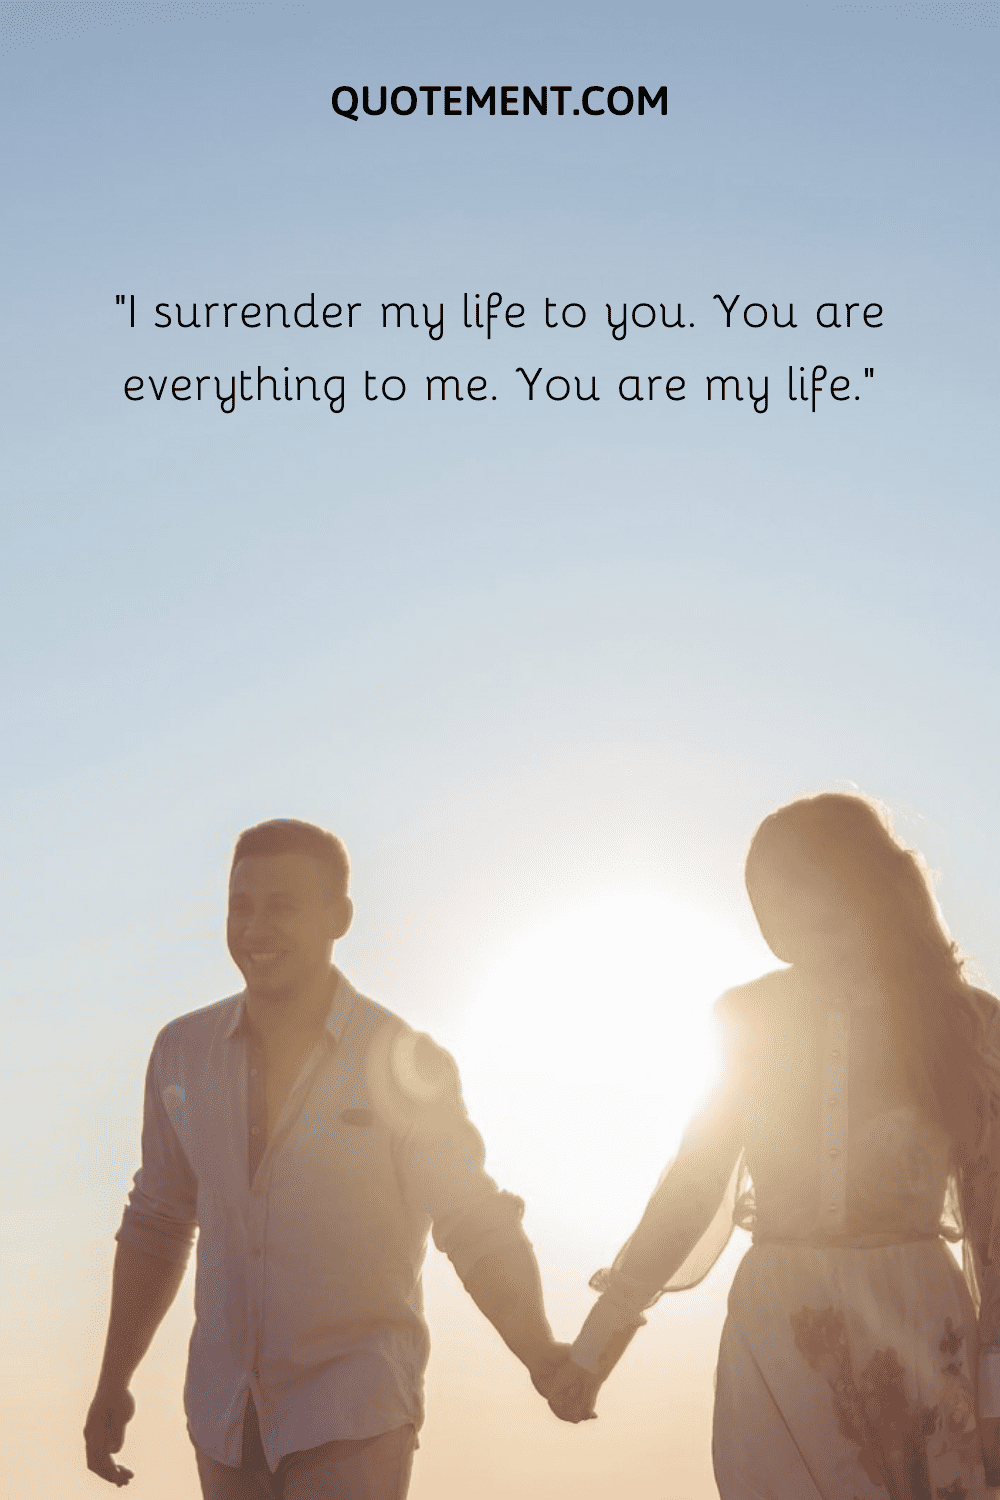 “I surrender my life to you. You are everything to me. You are my life.”